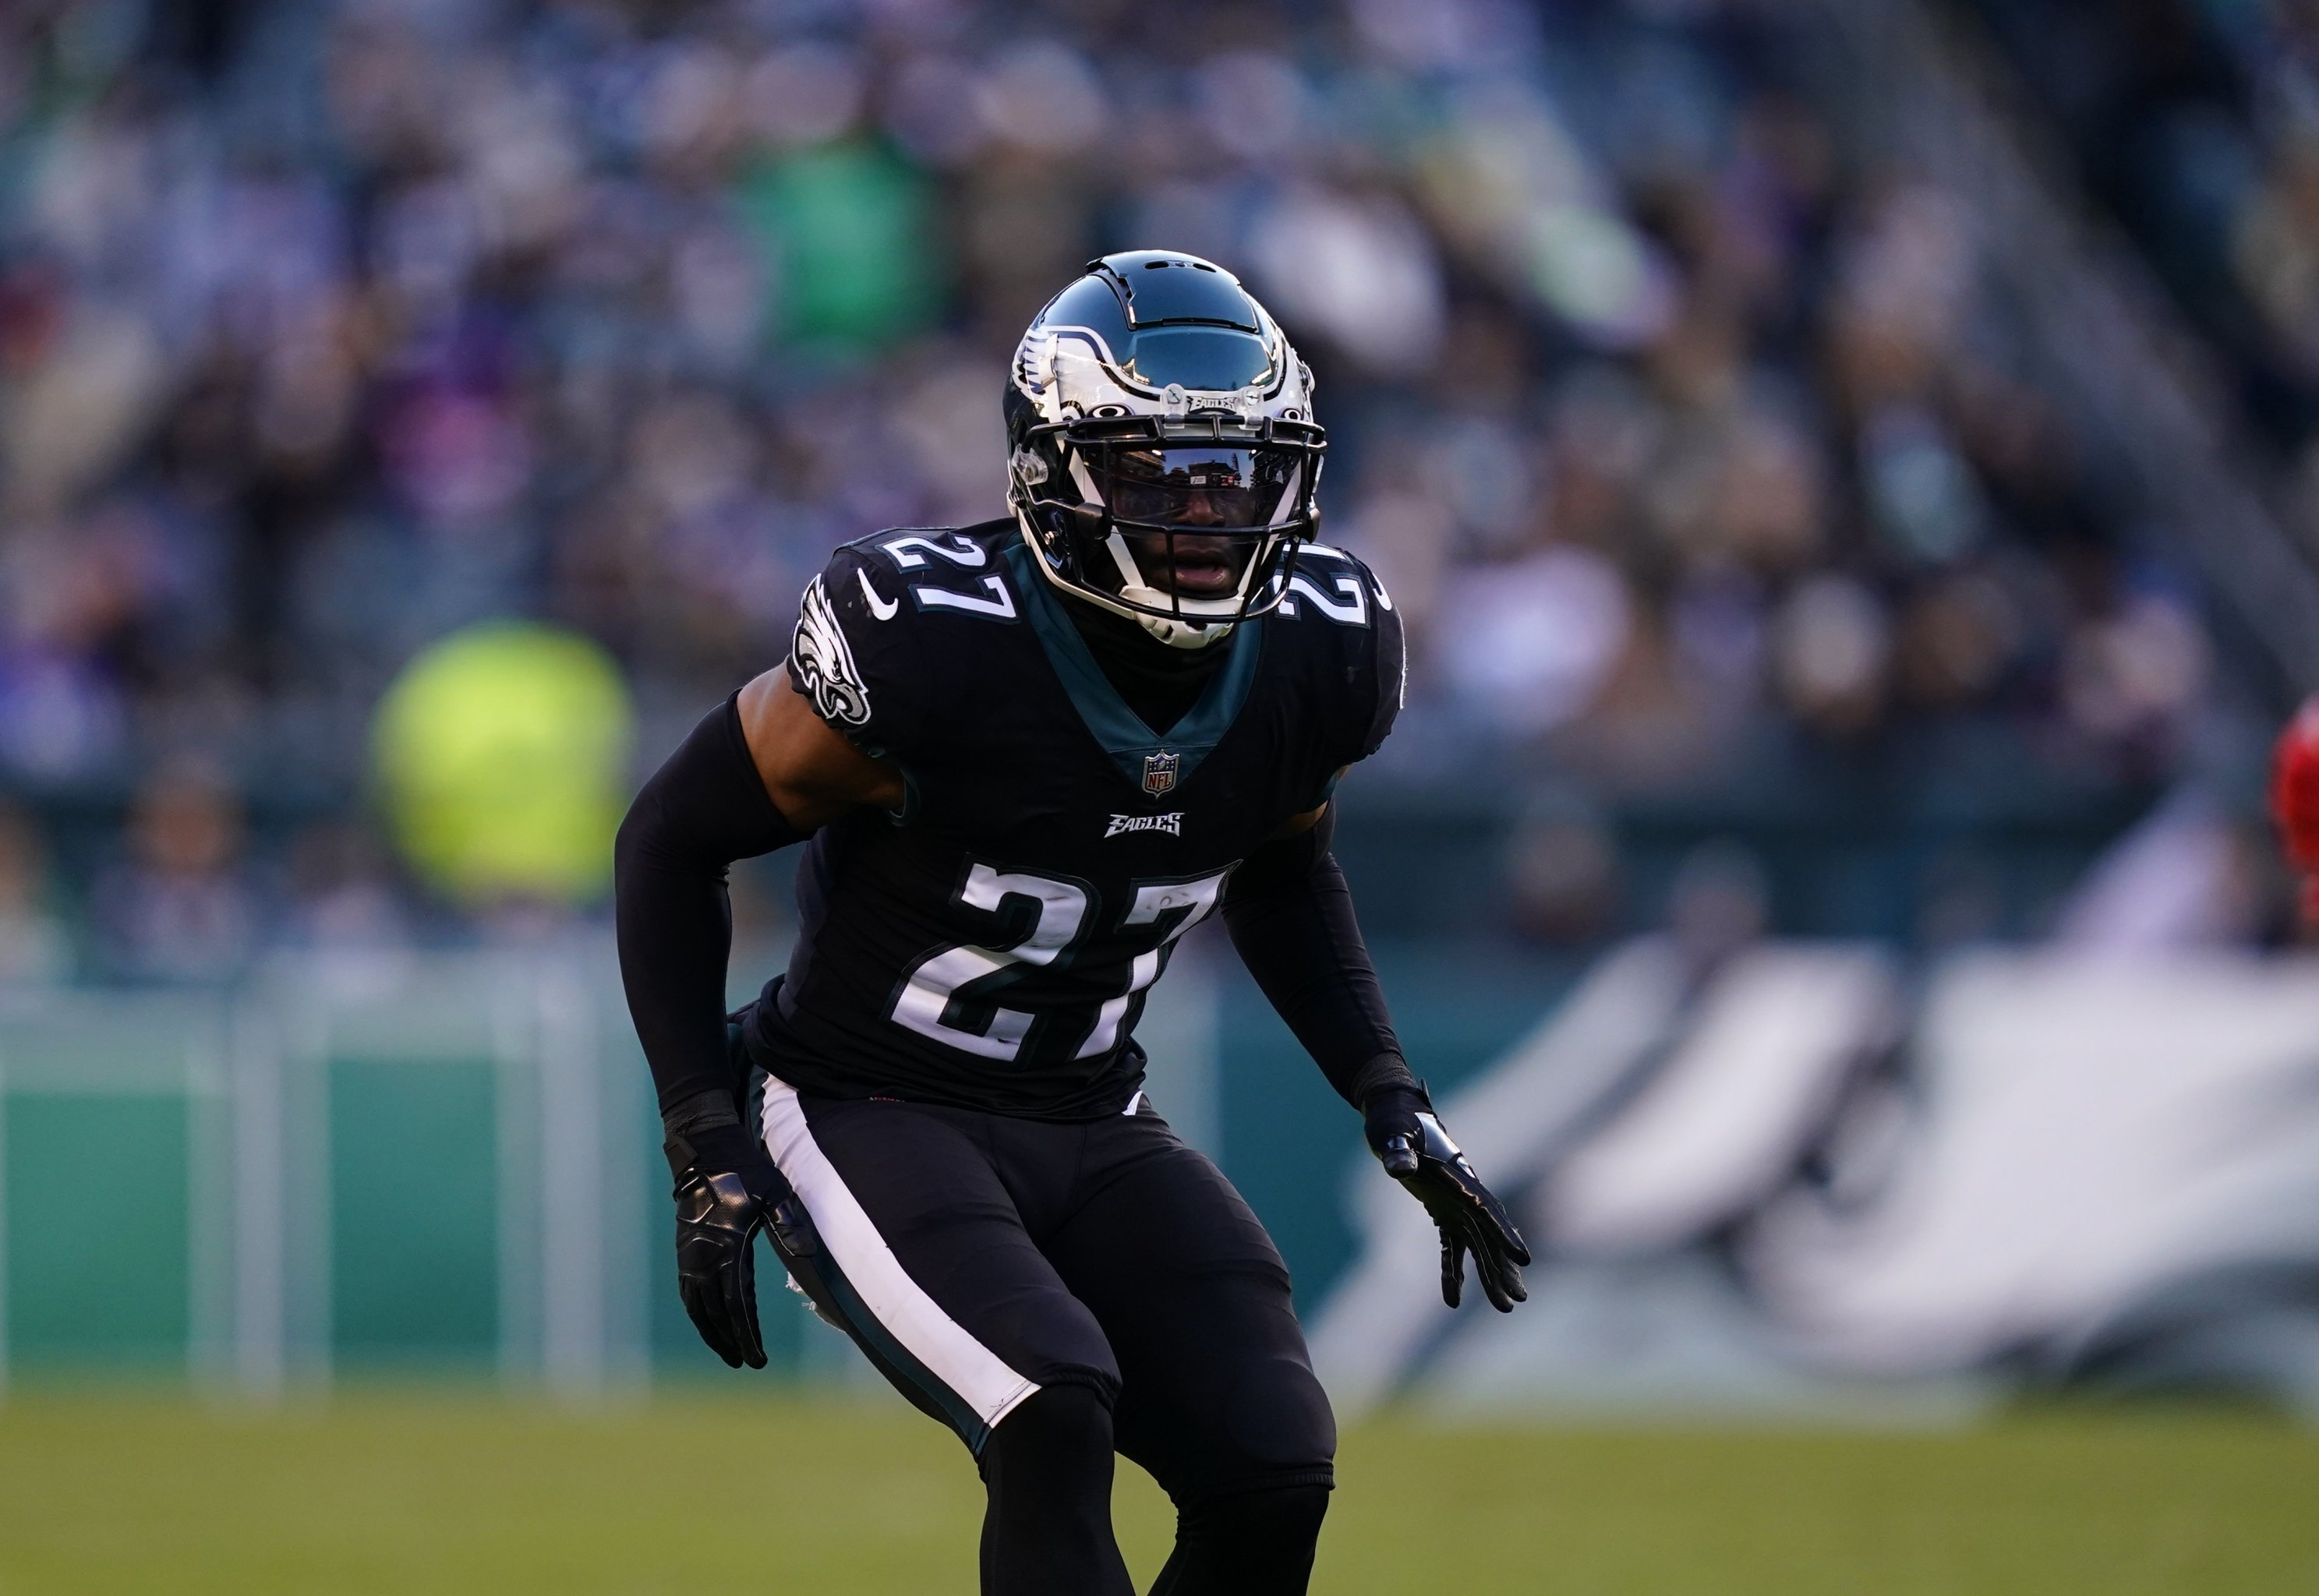 NFL Draft 2022: Here are 5 Eagles players impacted the most from